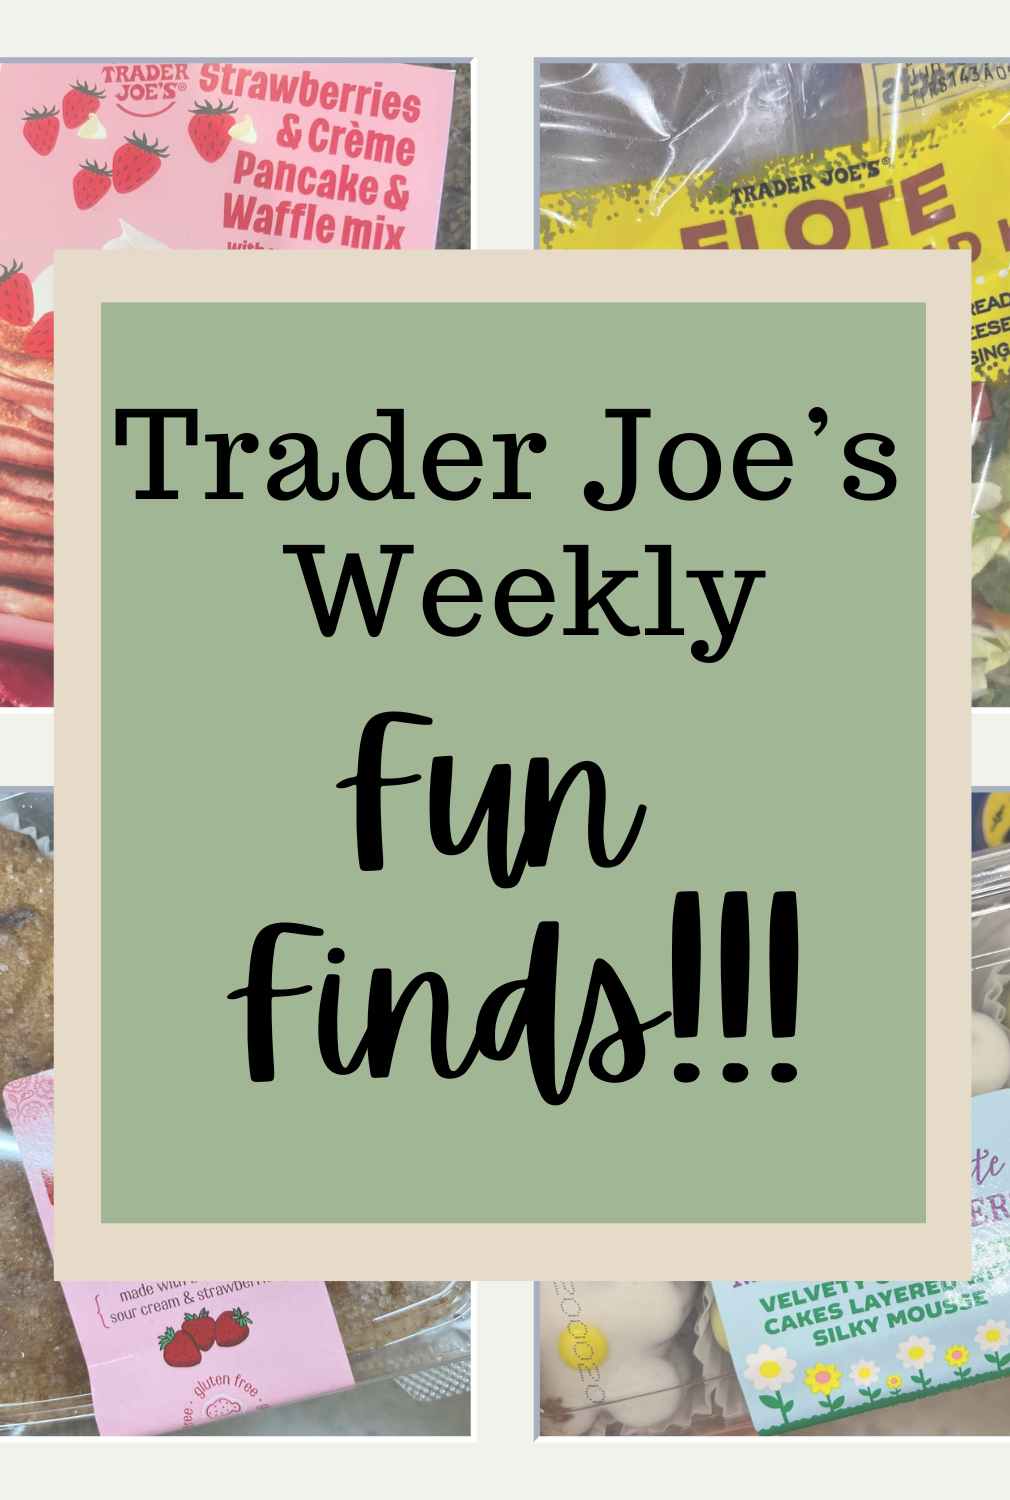 Trader Joe's Weekly Fun Finds Graphic.